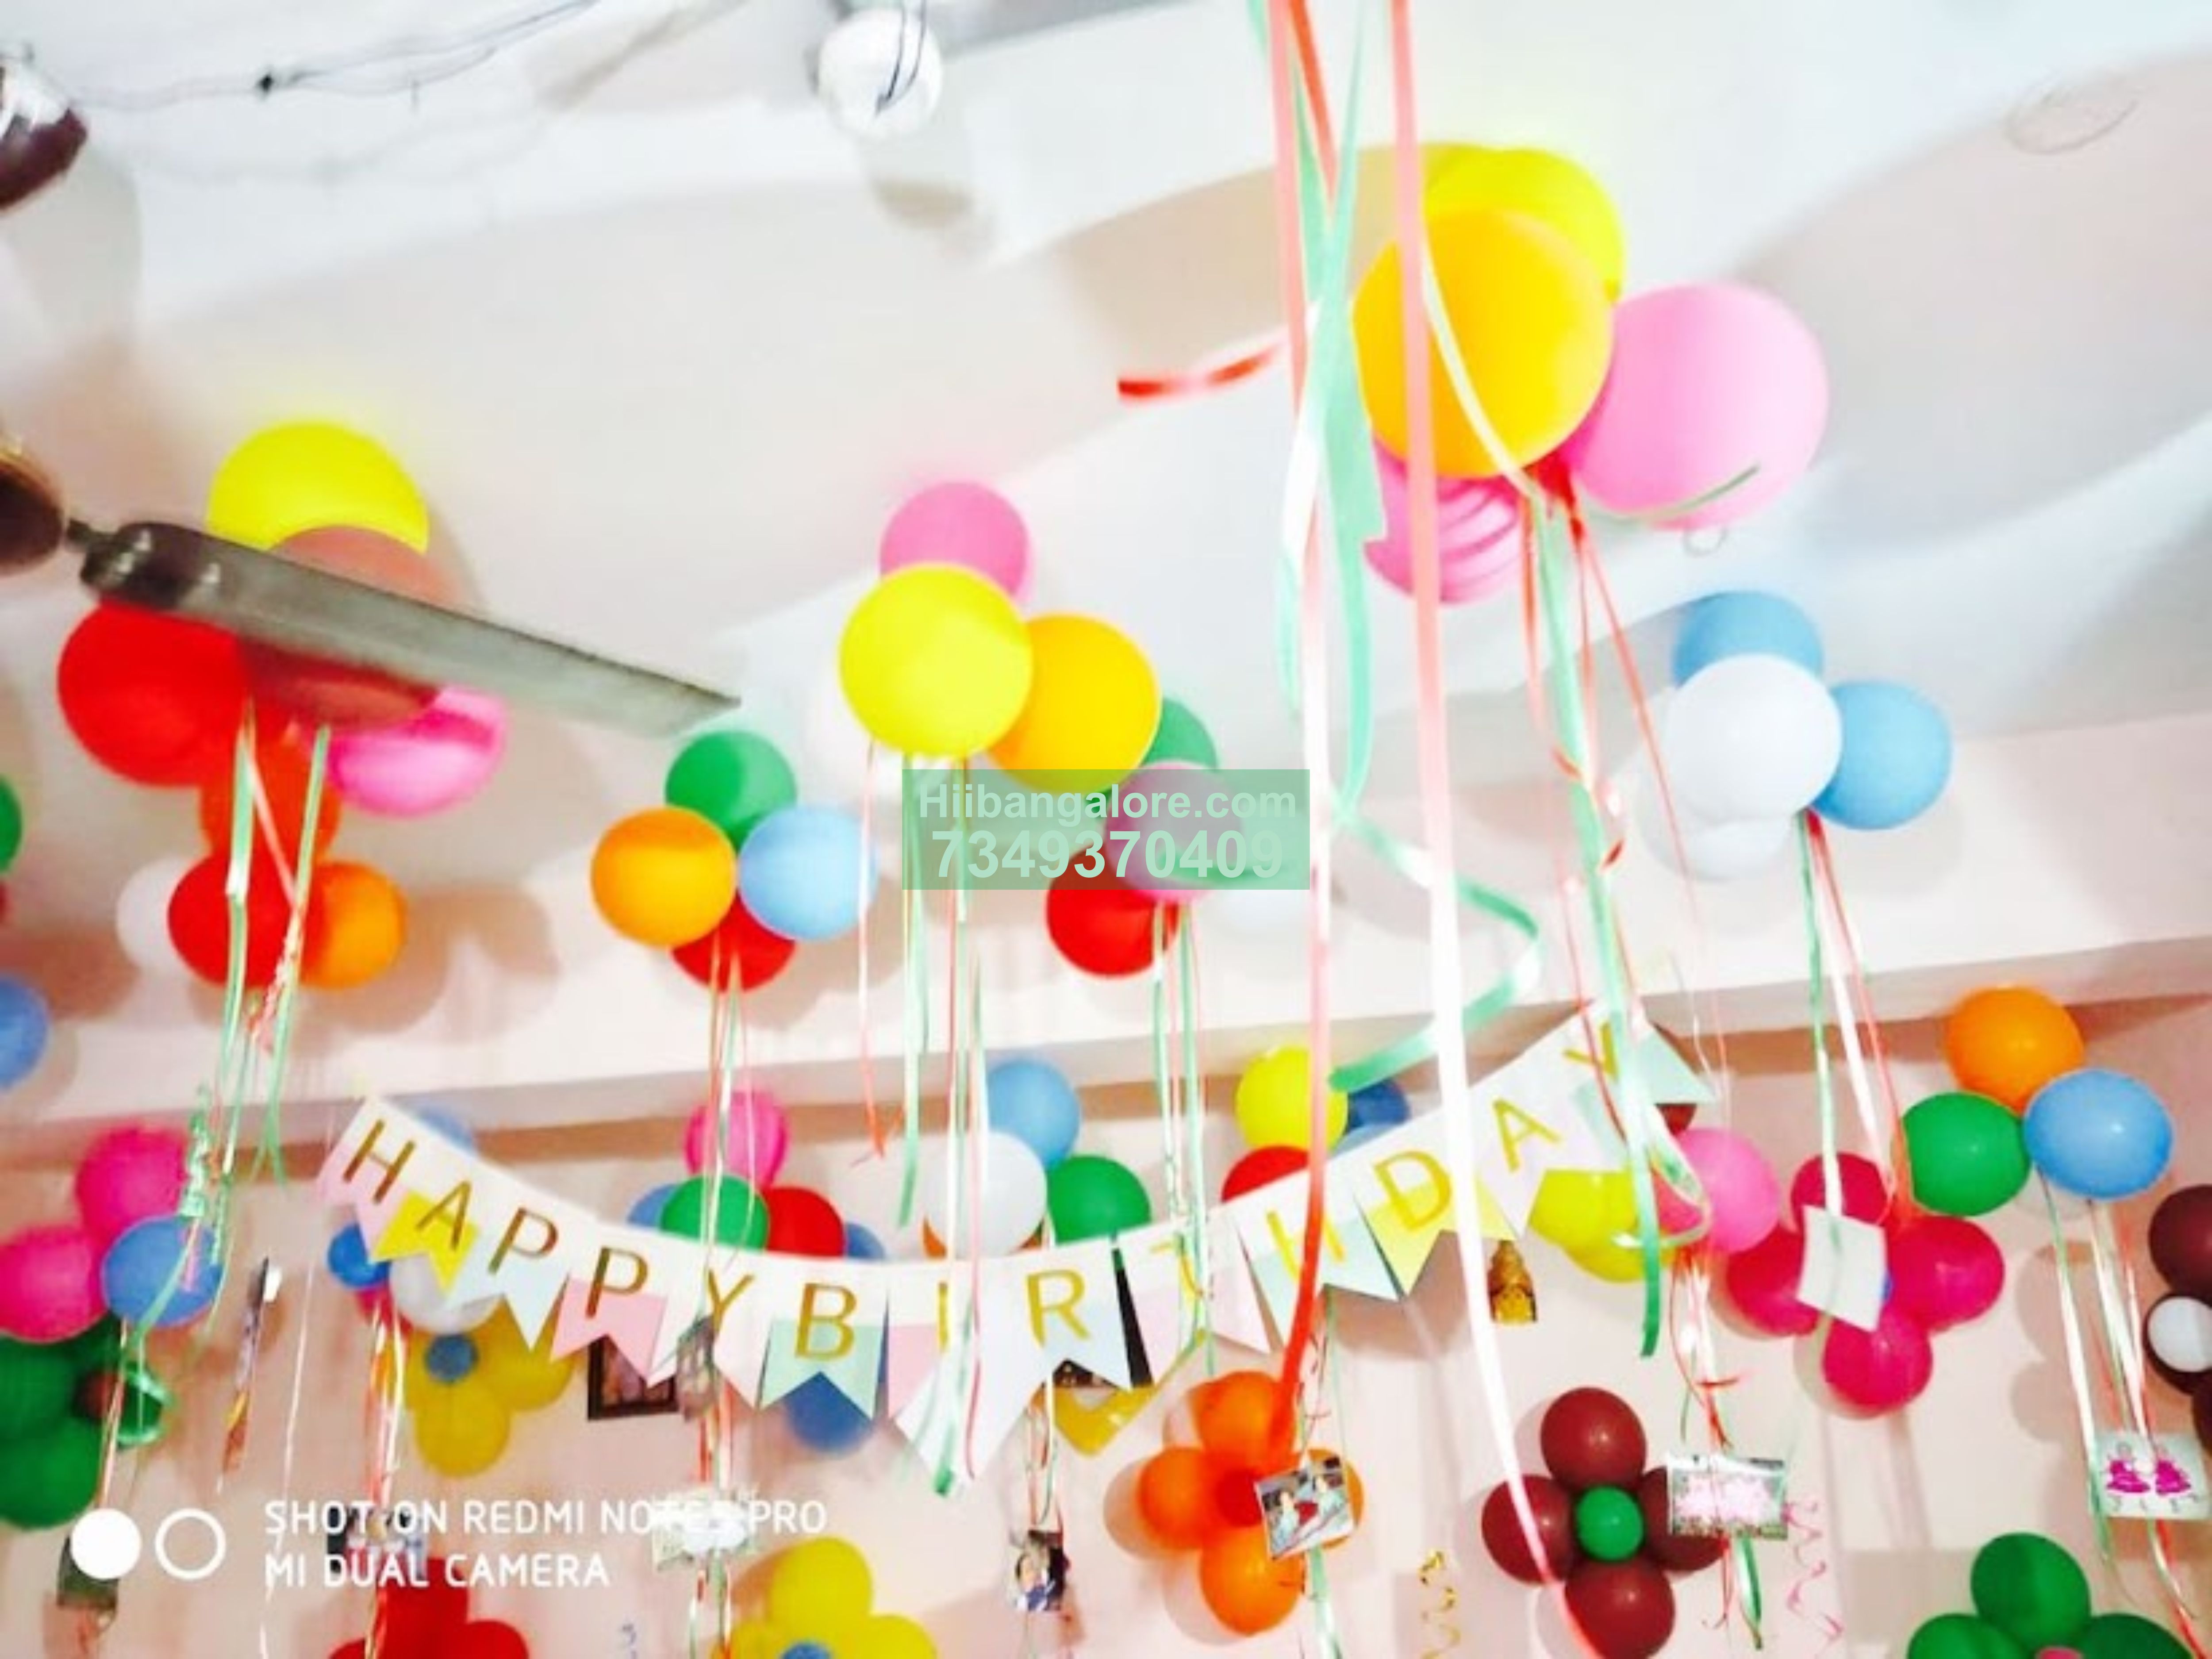 Simple Birthday Balloon Decoration at Home